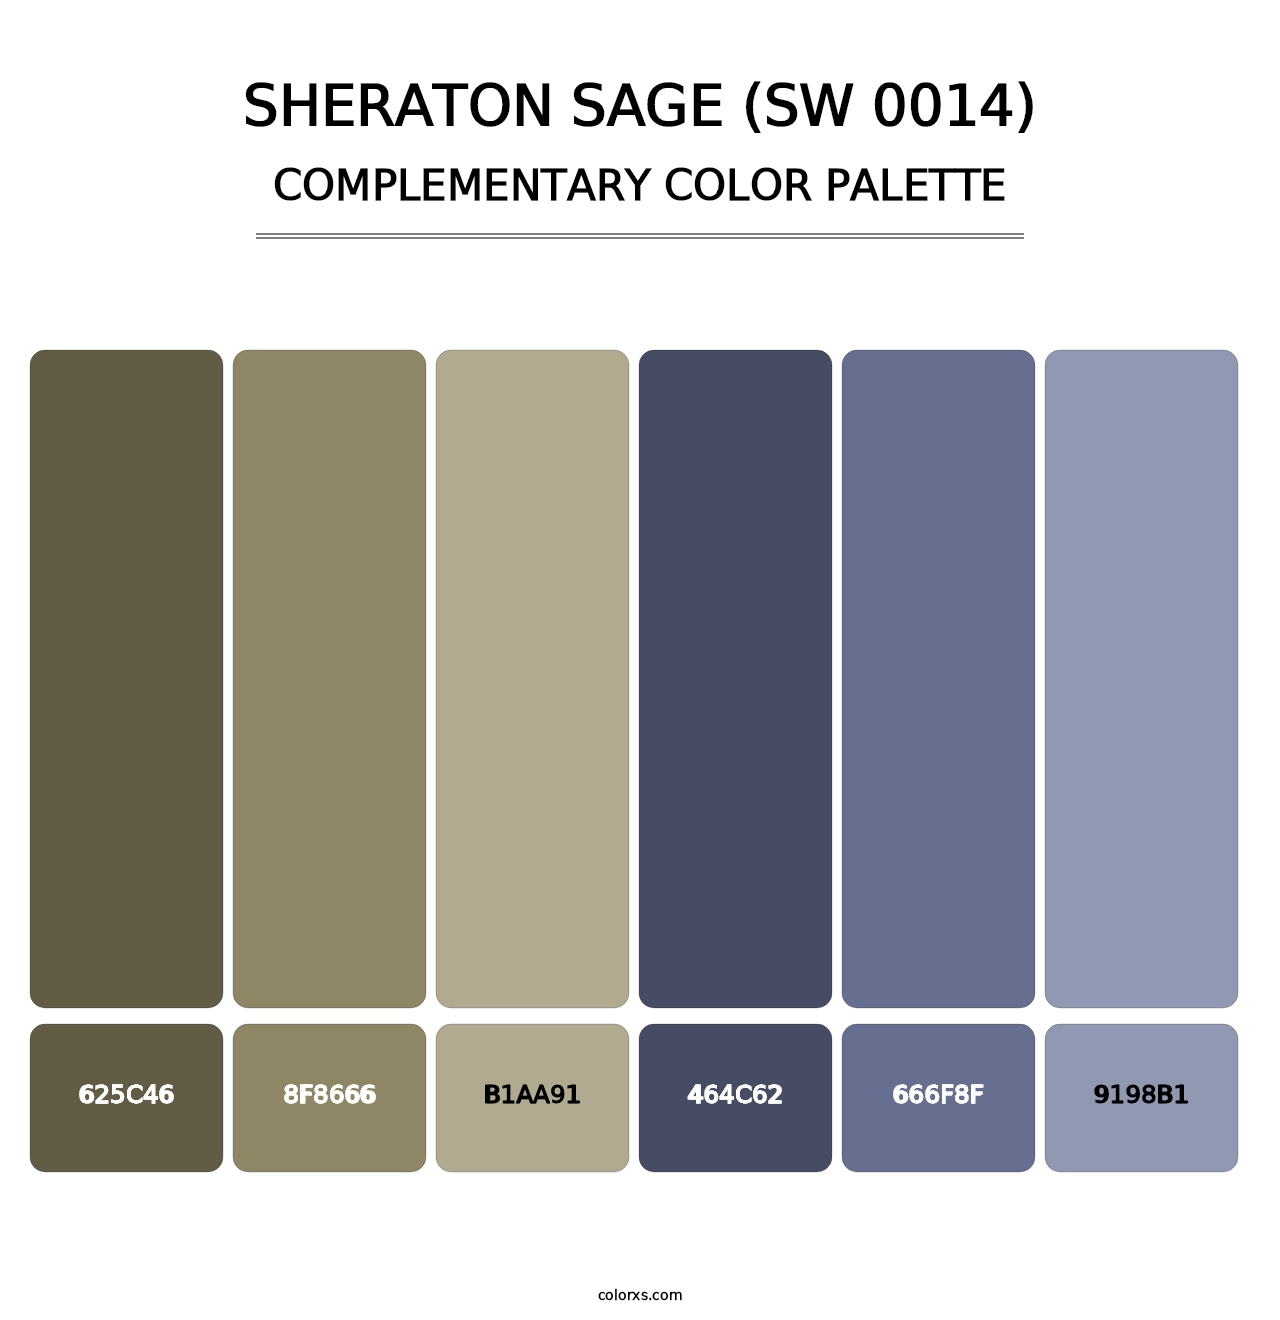 Sheraton Sage (SW 0014) - Complementary Color Palette